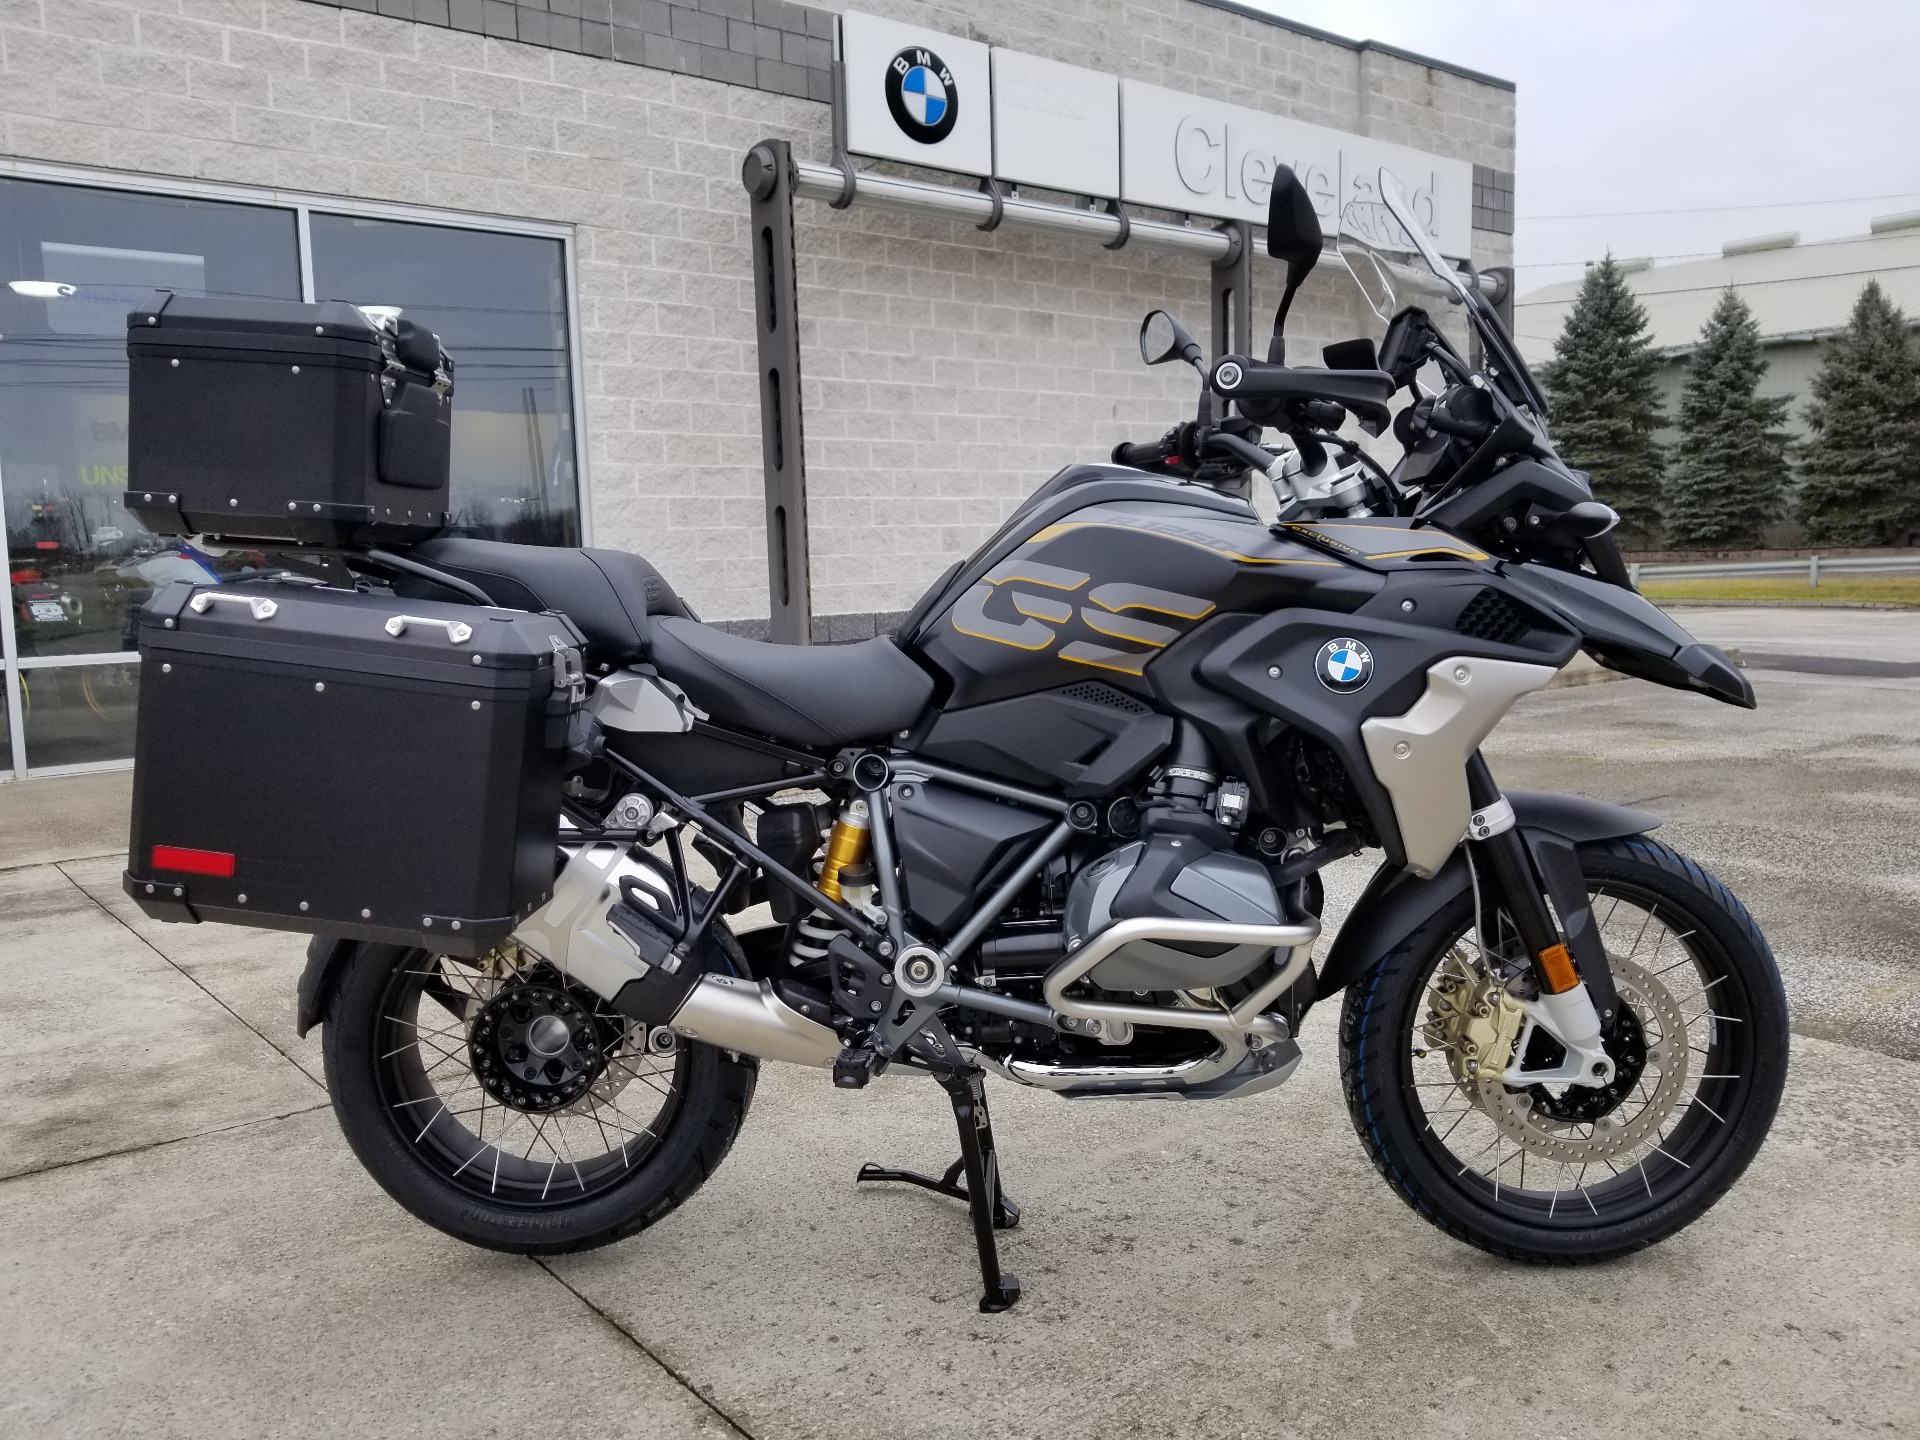 New 2019 BMW R 1250 GS Motorcycles in Aurora, OH Stock